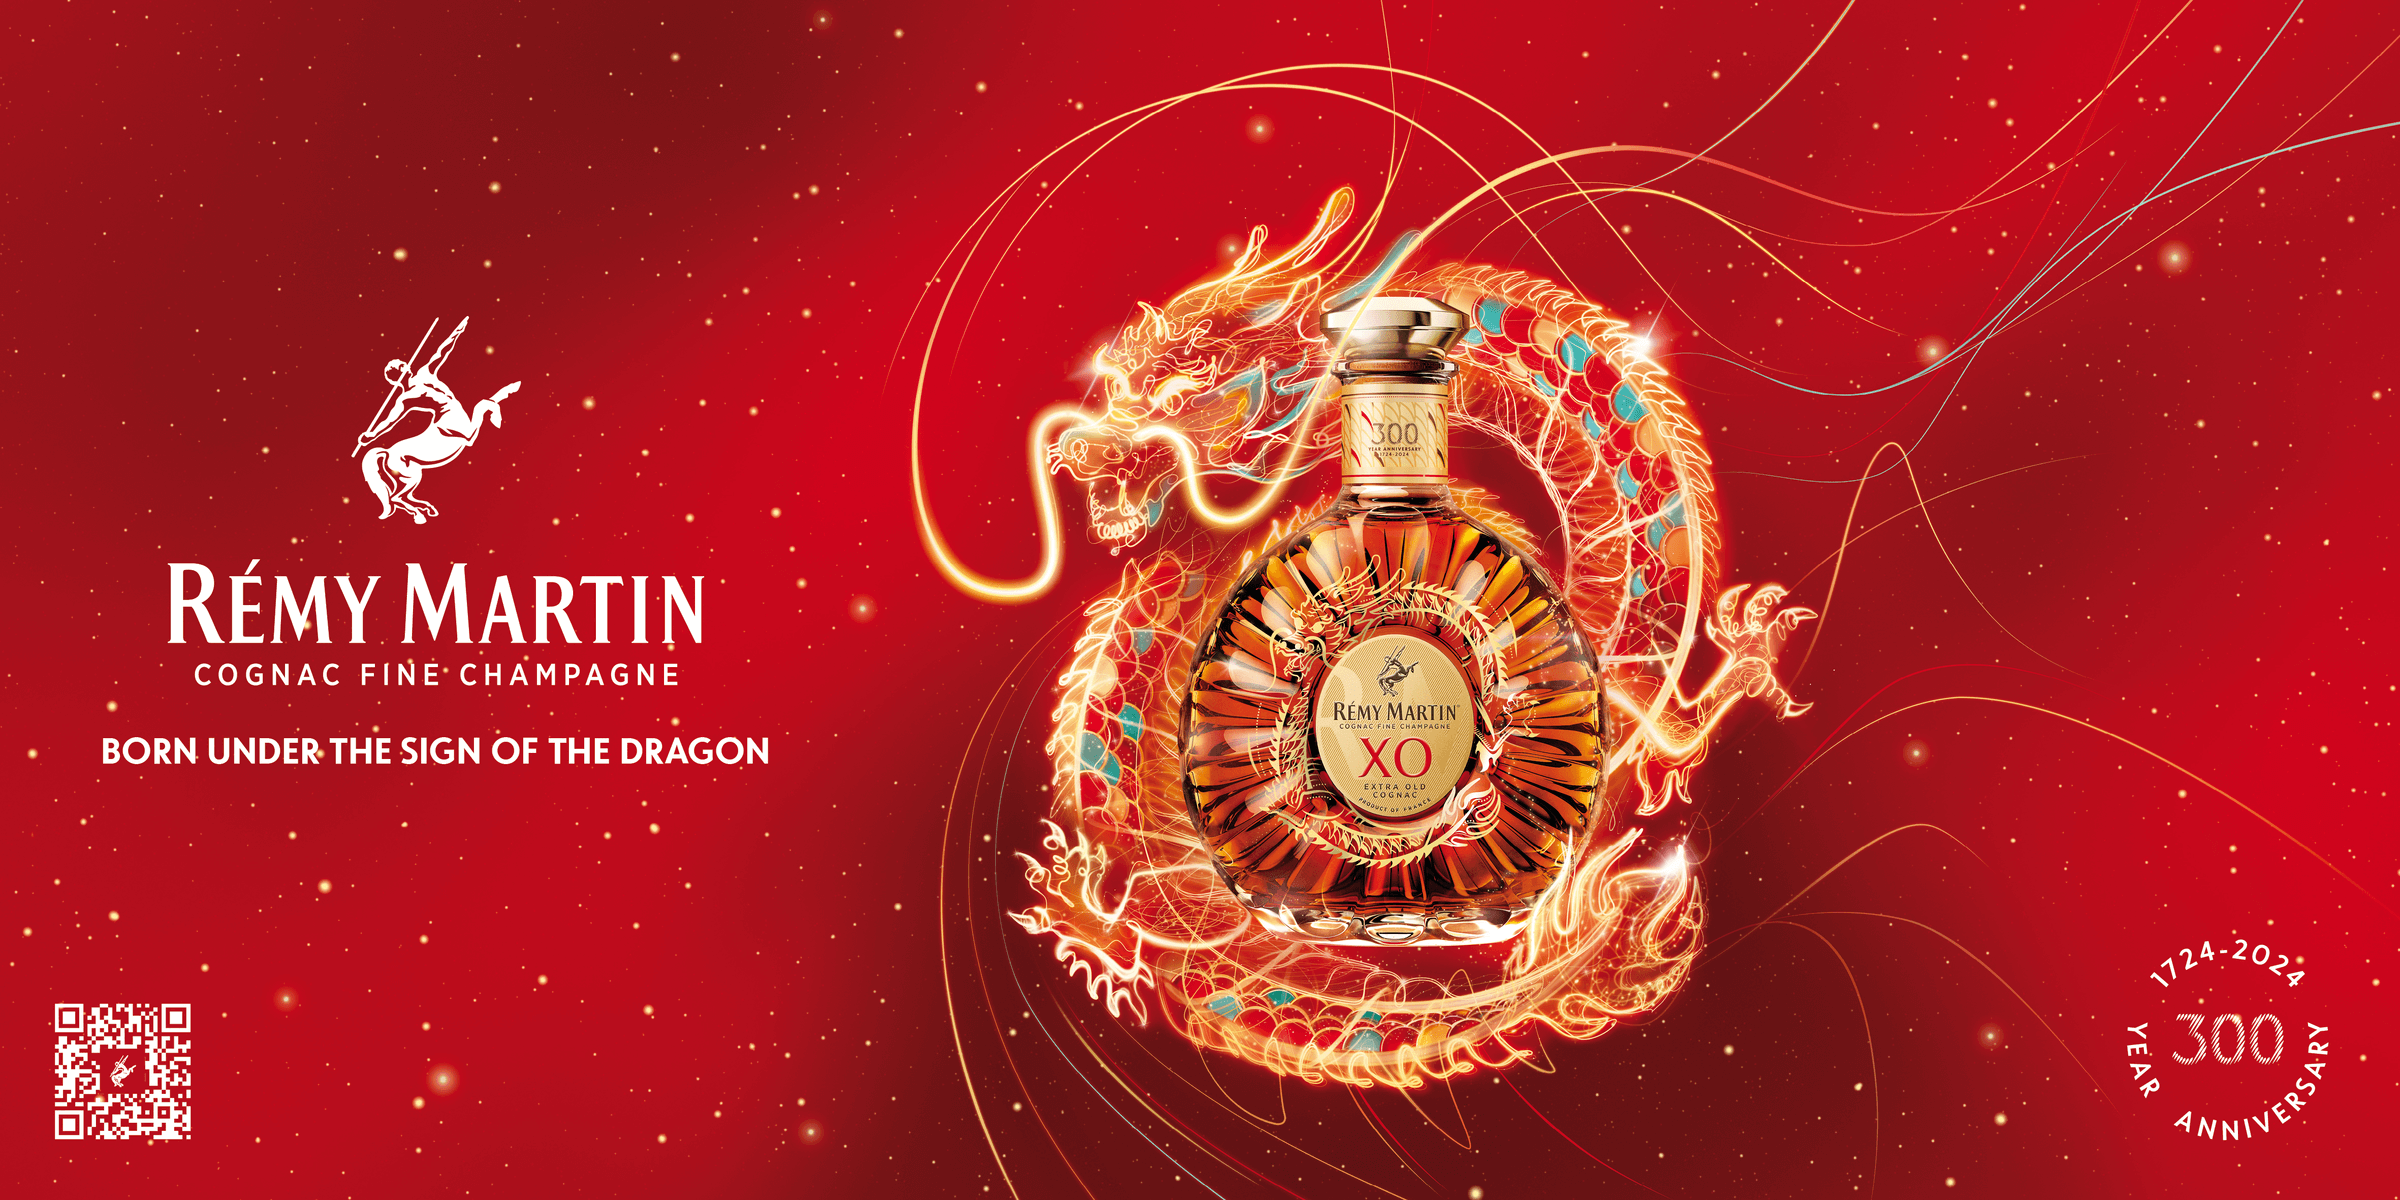 Rémy Martin opens 300-year anniversary celebrations with limited 